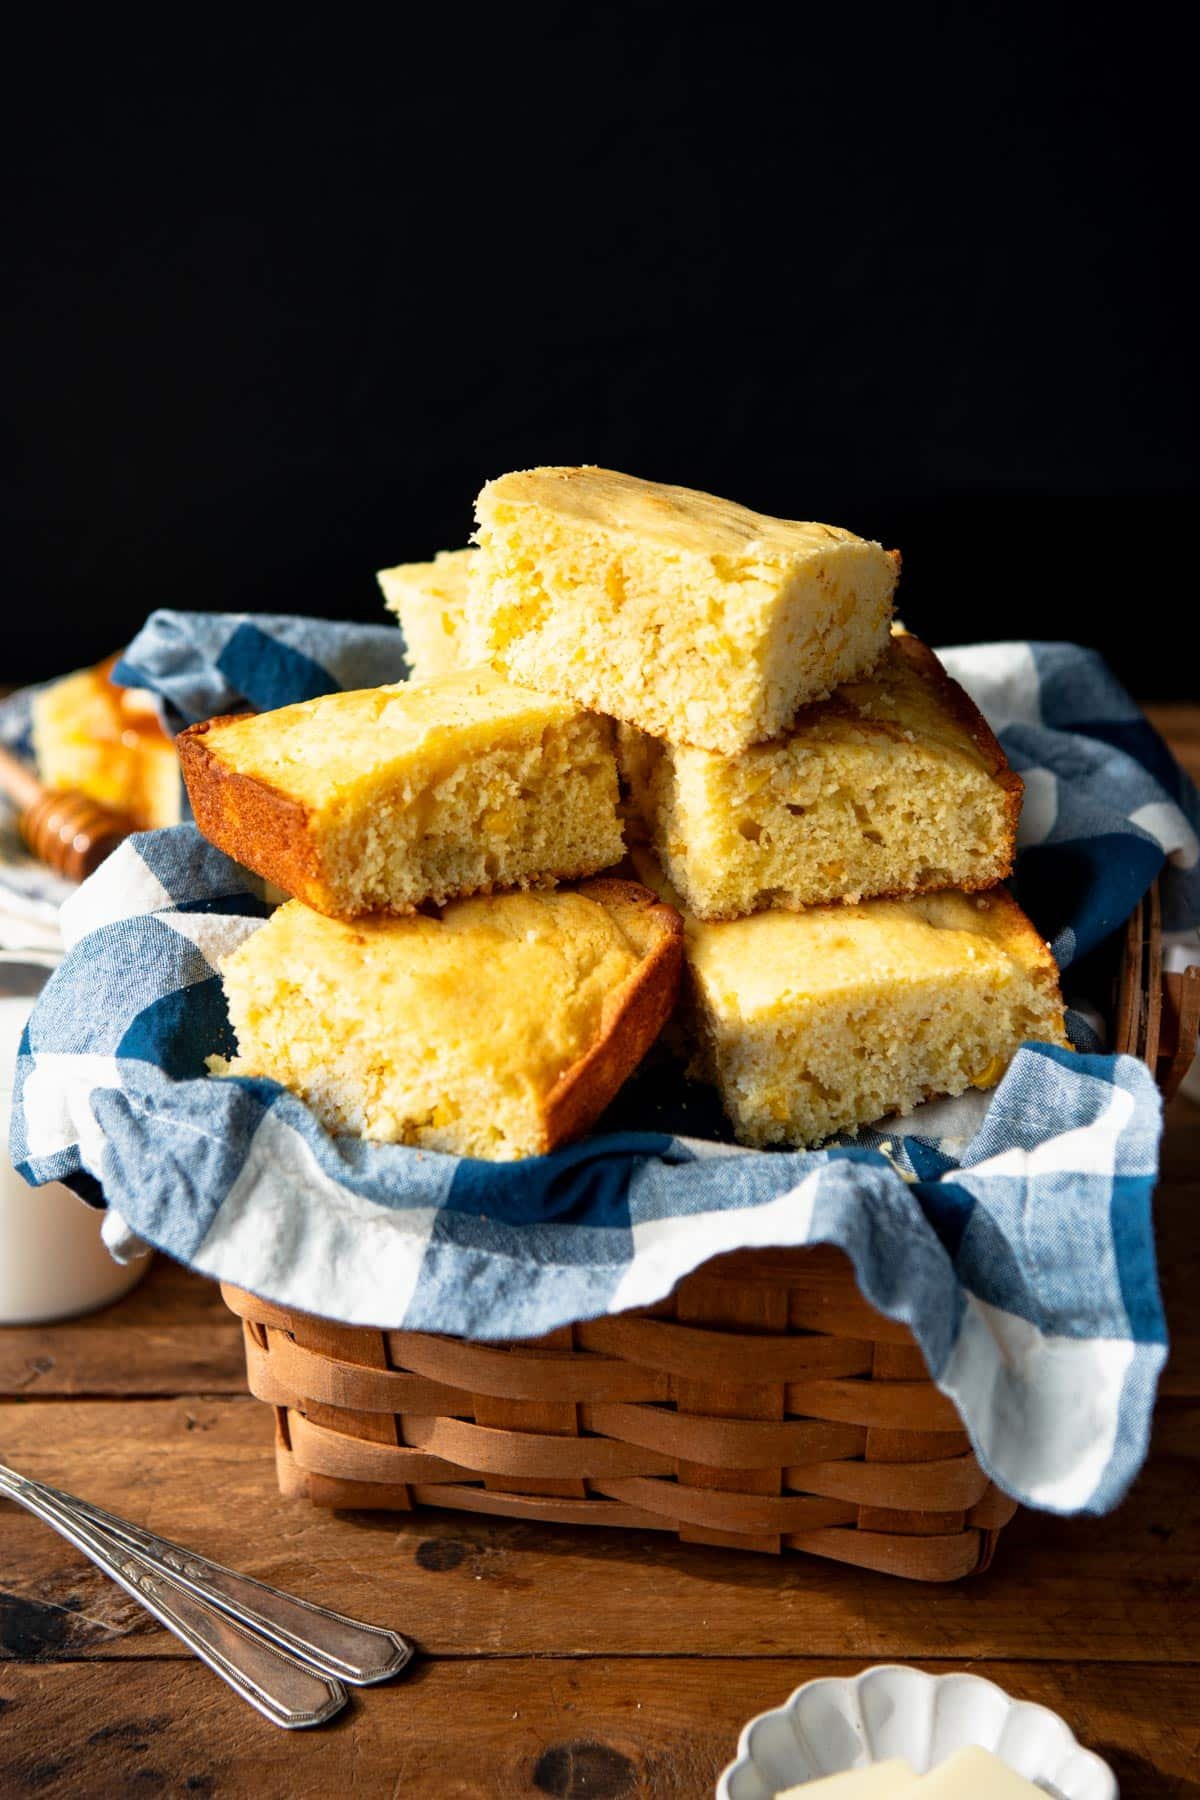 Sweet cornbread squares in a basket.